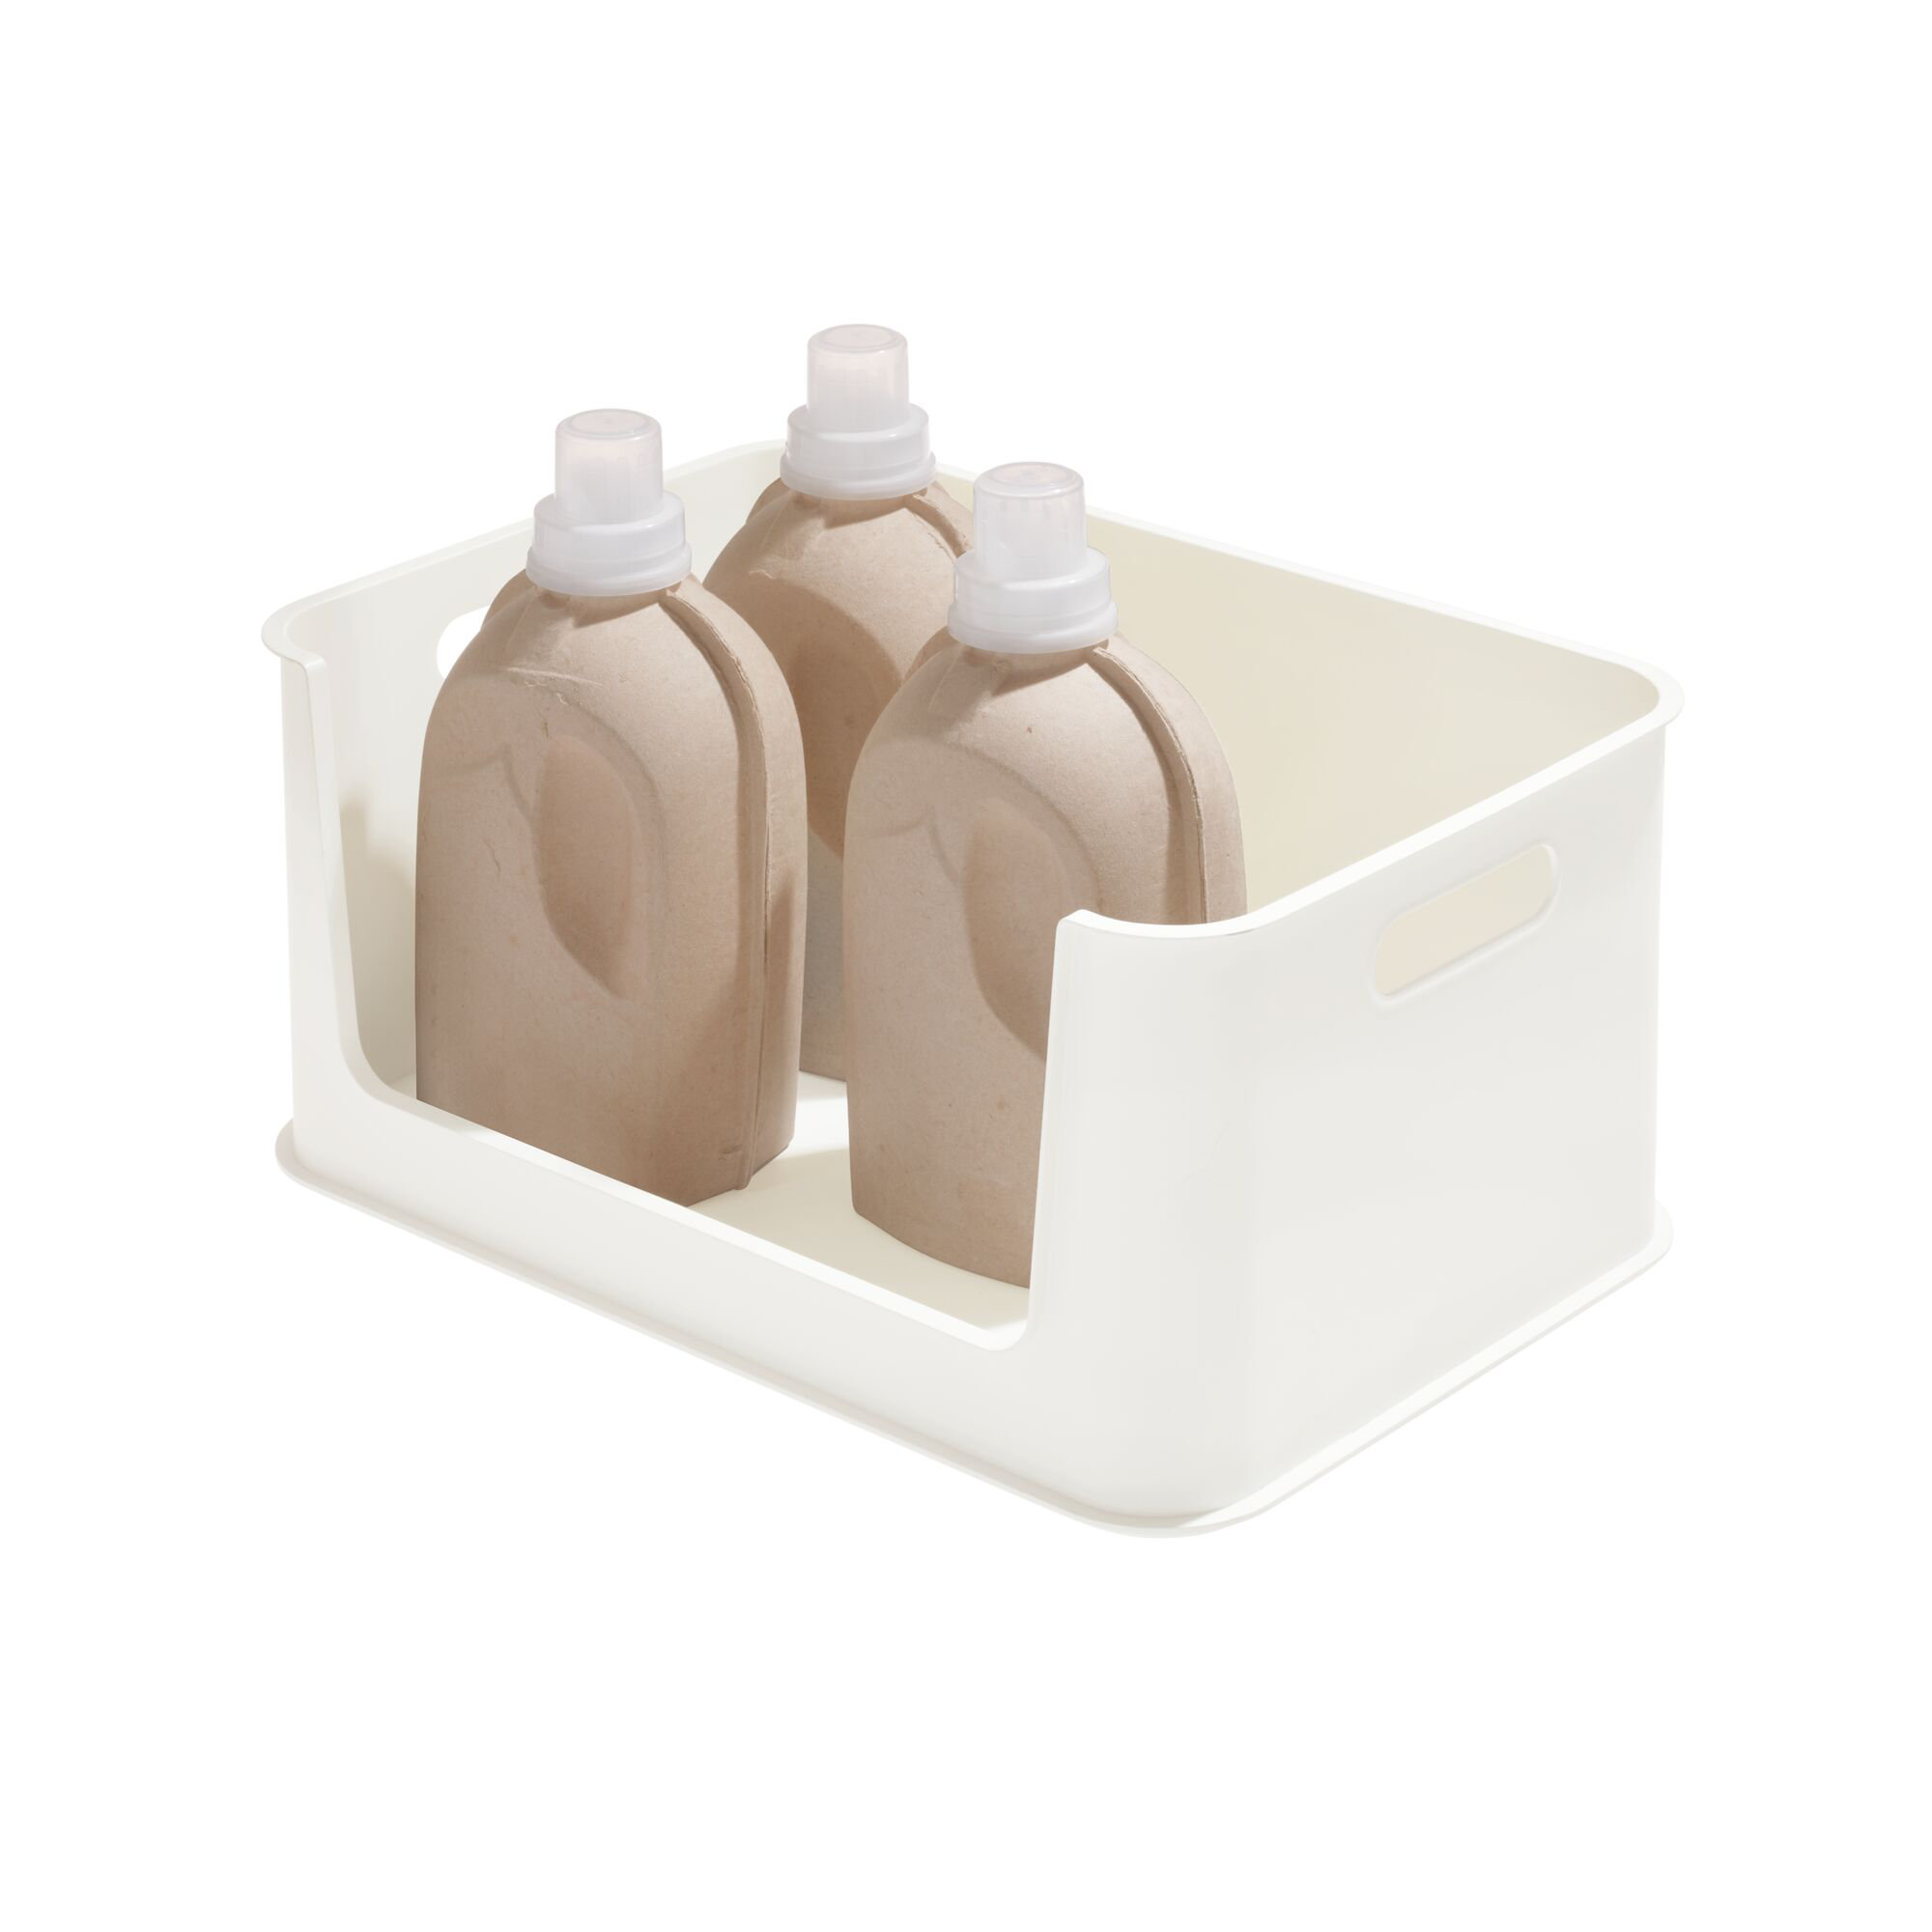 Free-standing small parts shelf unit with open fronted storage bins –  eurokraft pro: double sided